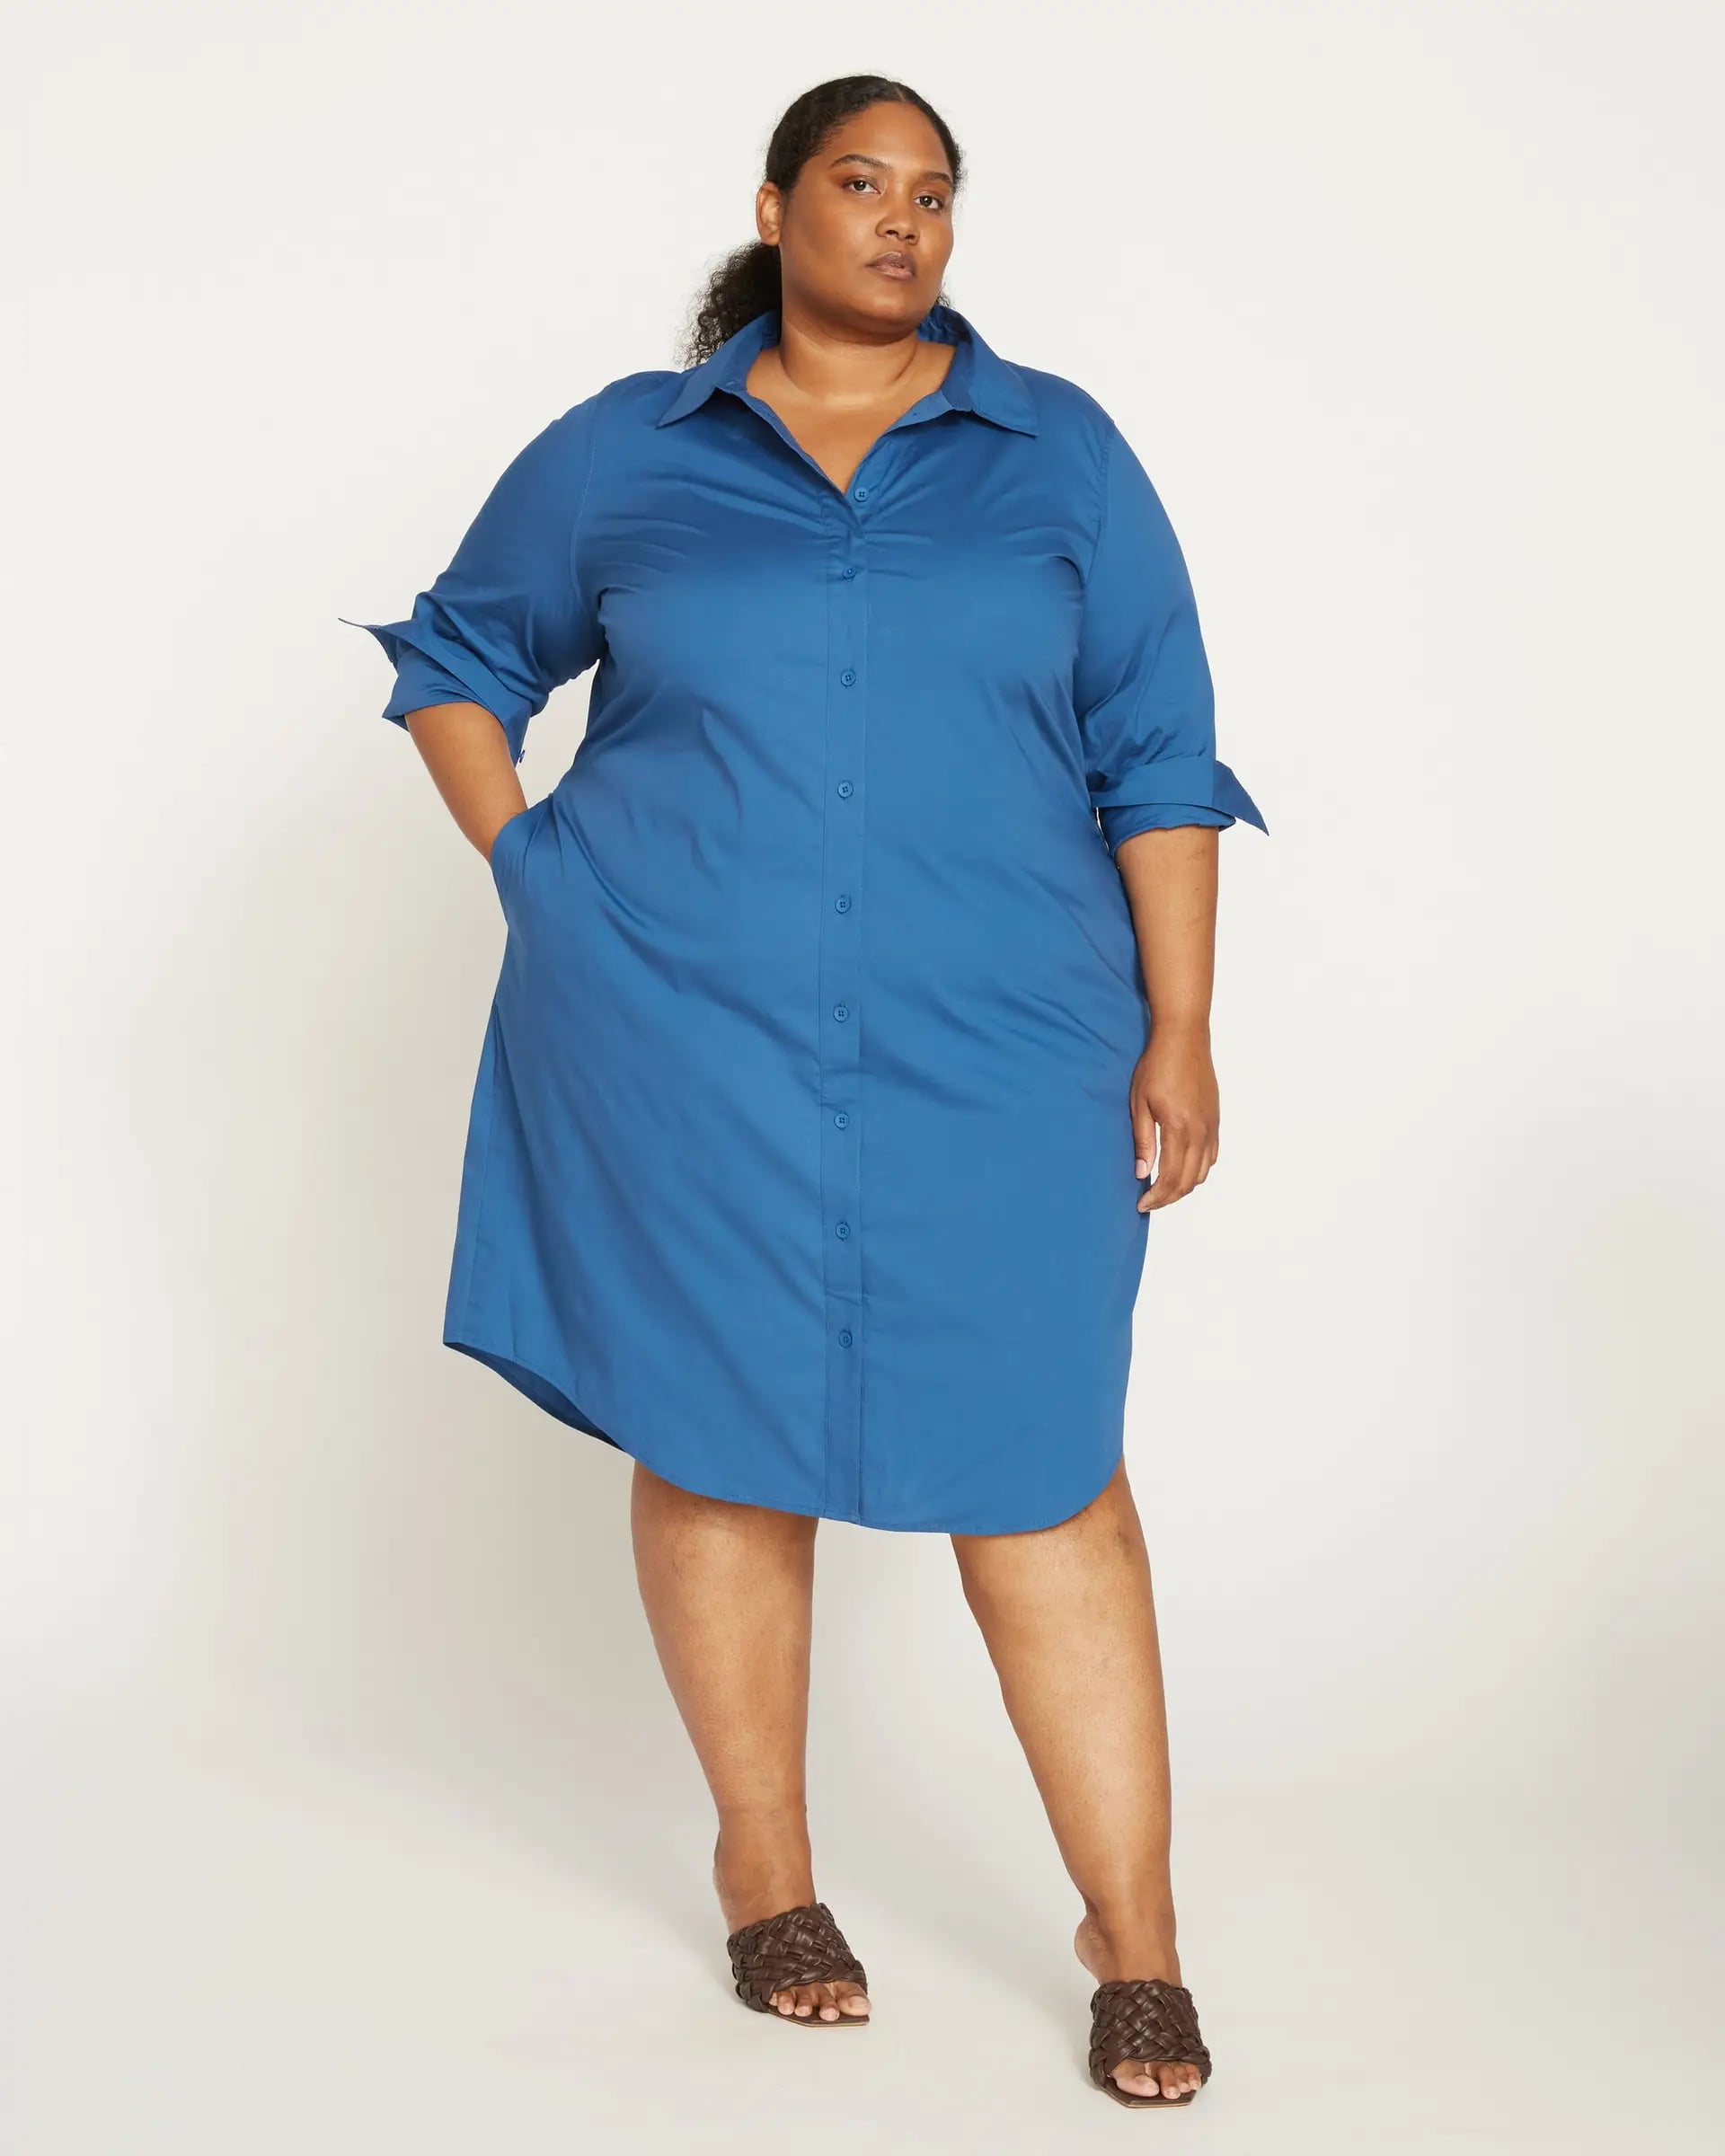 Office Wear Plus Size For Girls, Befitting and Affordable 